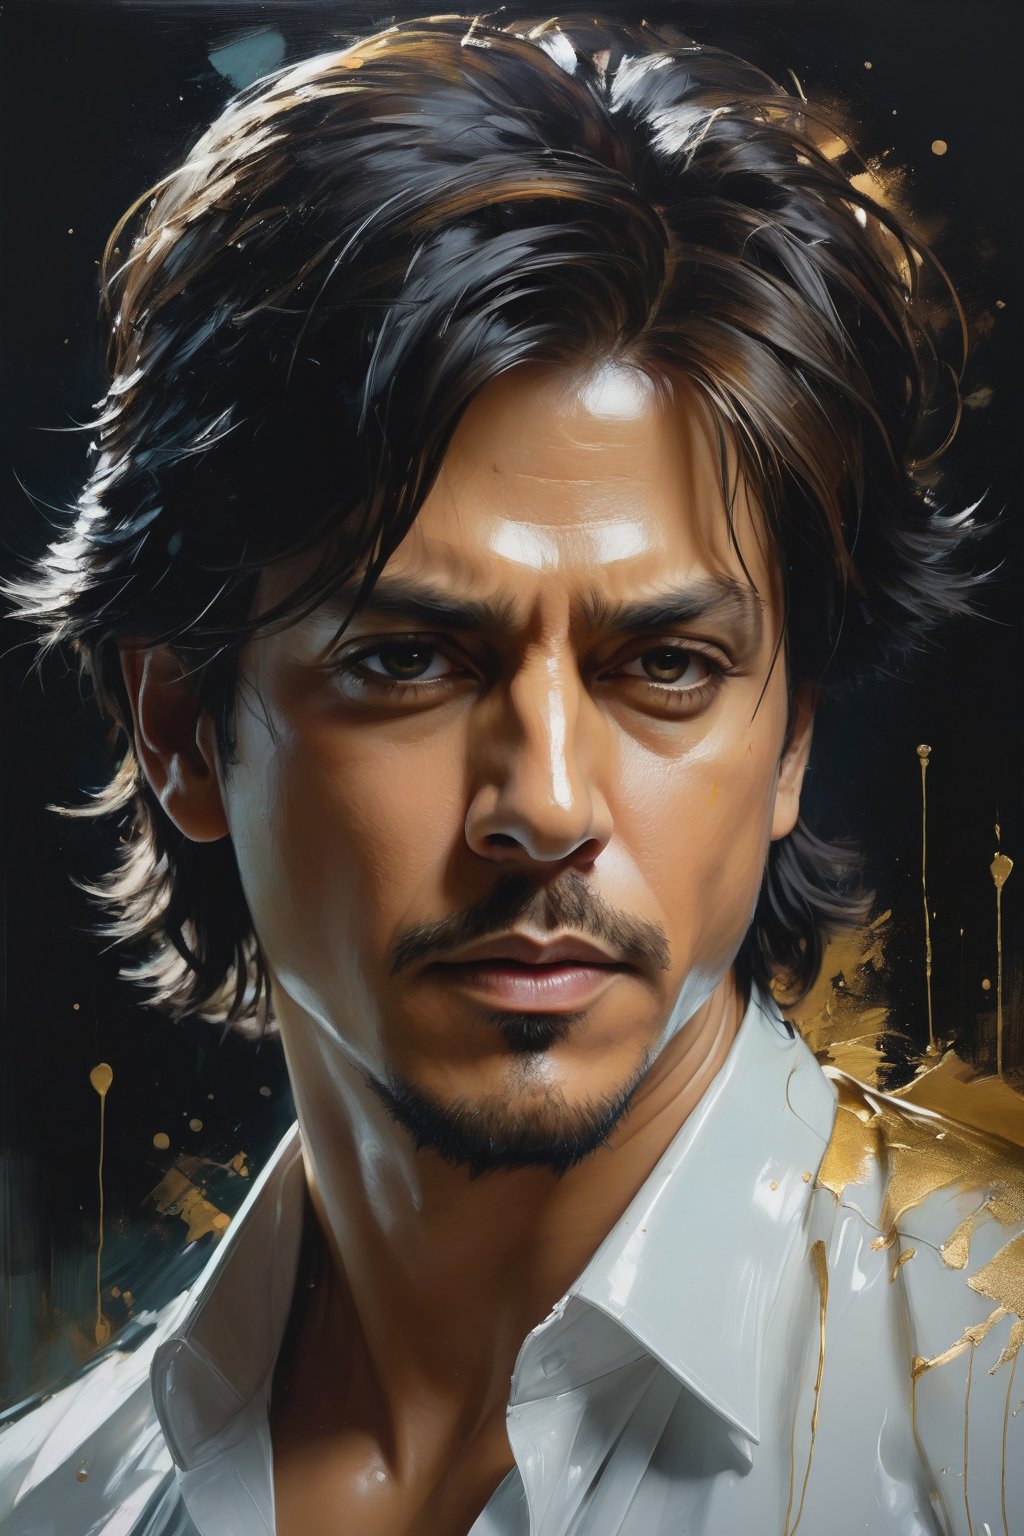 Sharp focus captures Sharukh Khan's stunning features as he stands confidently, medium-long fuzzy hair framing his chiseled face. Perfectly symmetric eyes radiate determination beneath heavy brows. A breathtaking oil painting by Jeremy Mann, Carne Griffiths, and Robert Oxley combines rich, deep colors with layered shading, evoking the golden ratio. Volumetric lighting accentuates every contour of this masterpiece. Dripping paint adds texture to the award-winning portrait, trending on ArtStation.